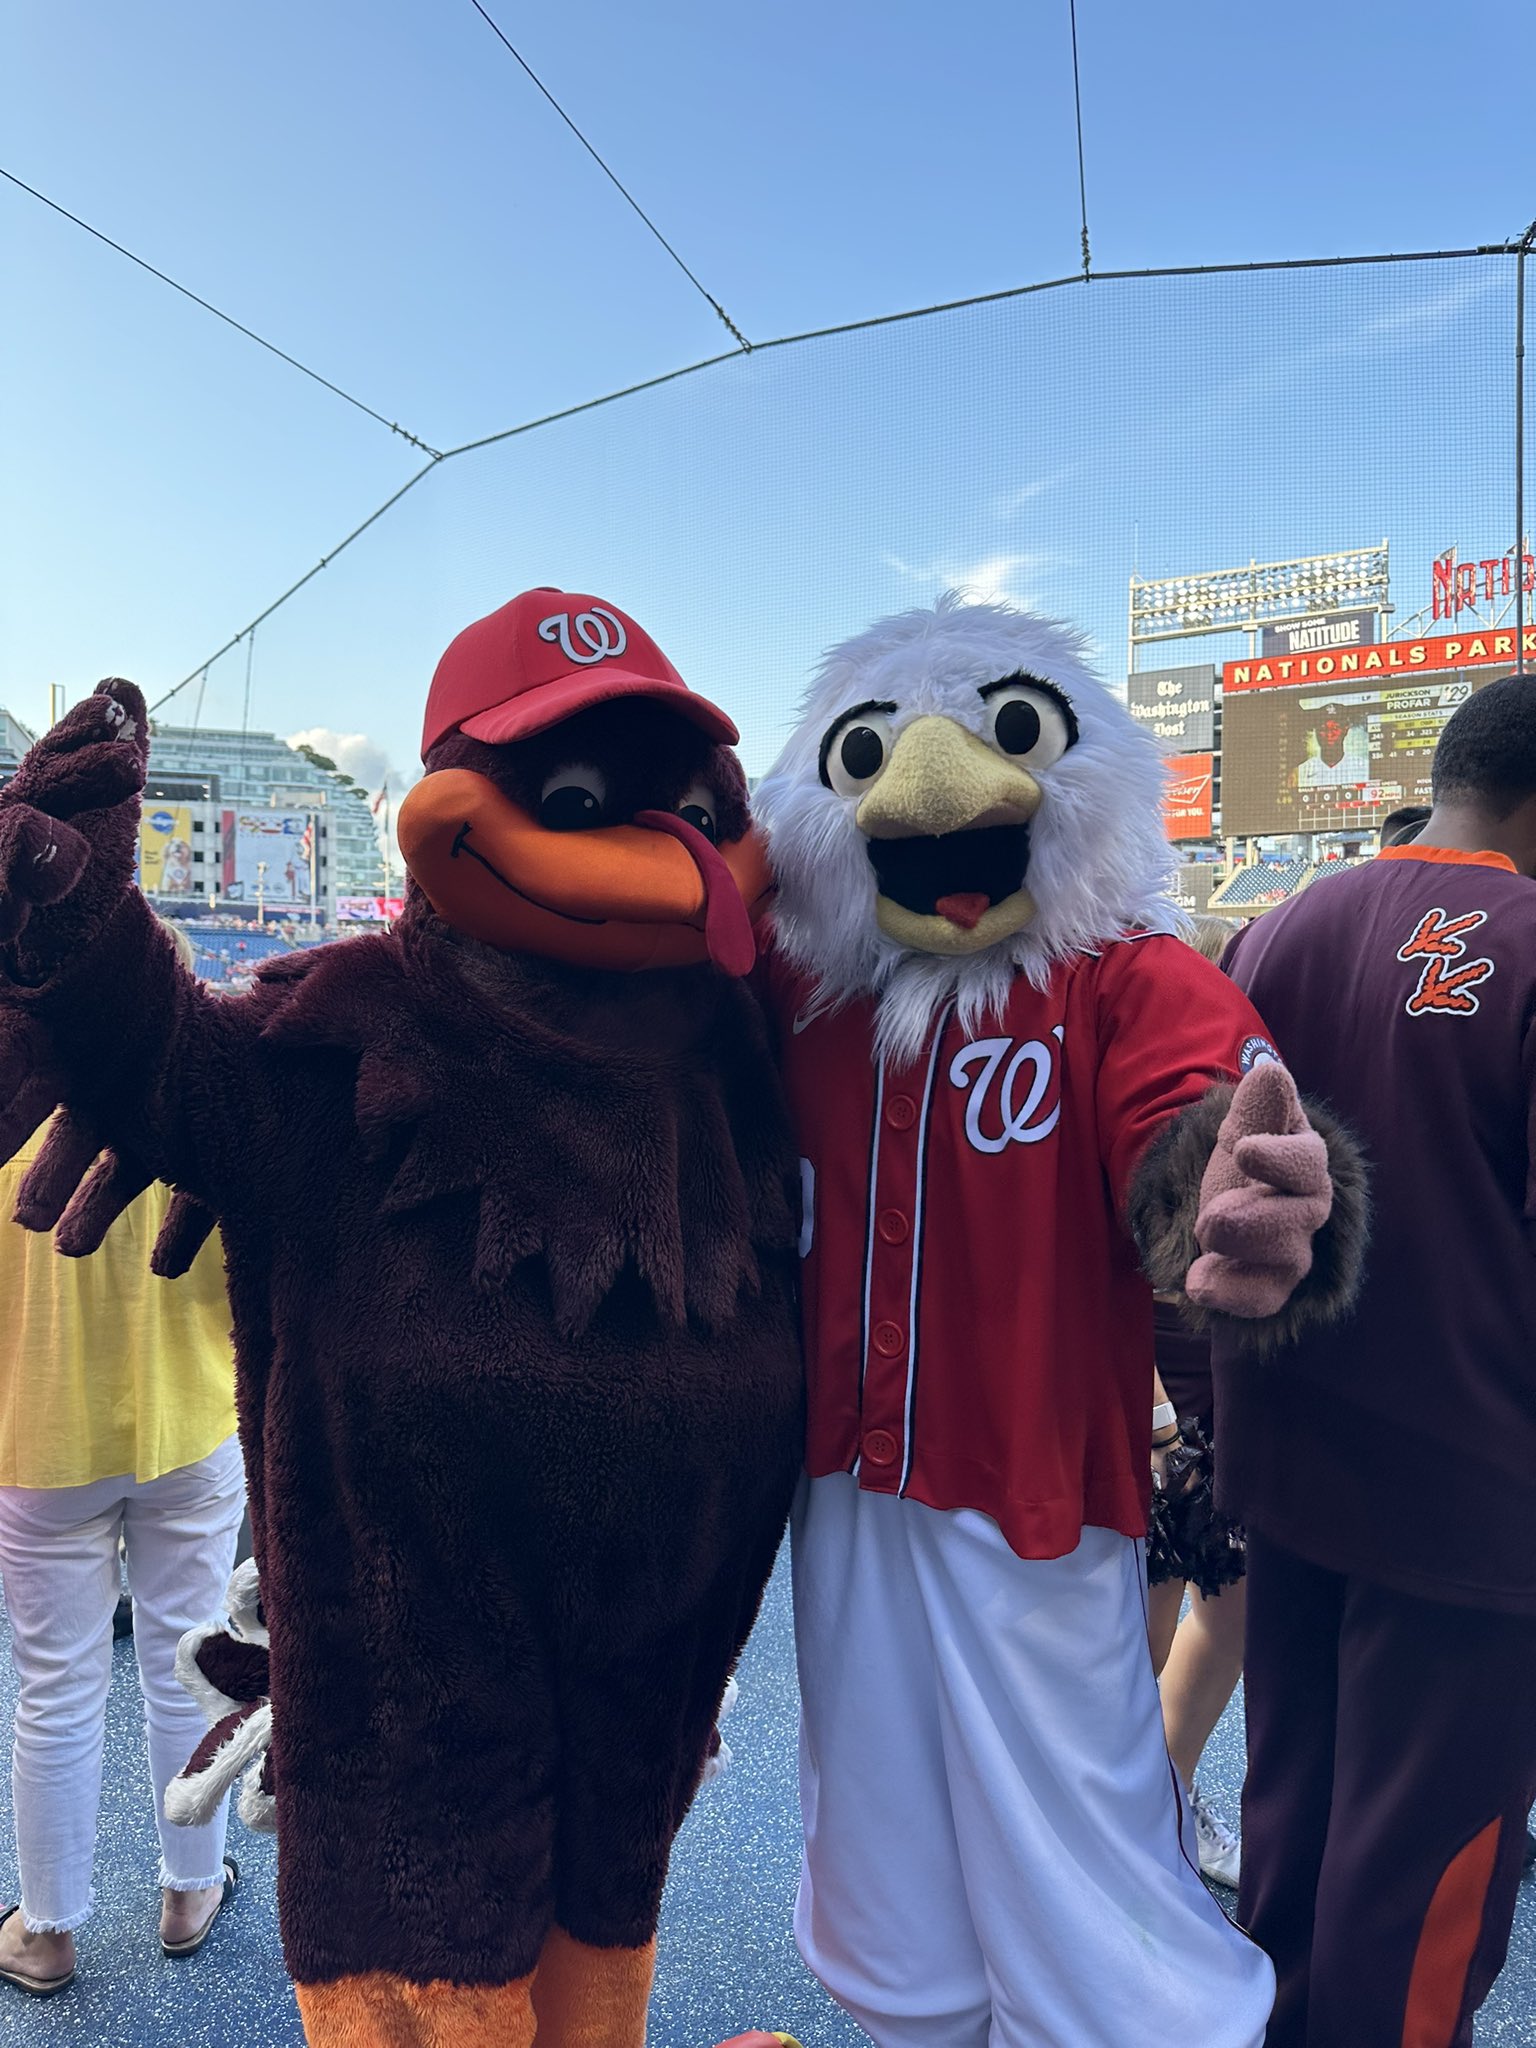 SCREECH on X: Just the two biggest birds, celebrating Virginia